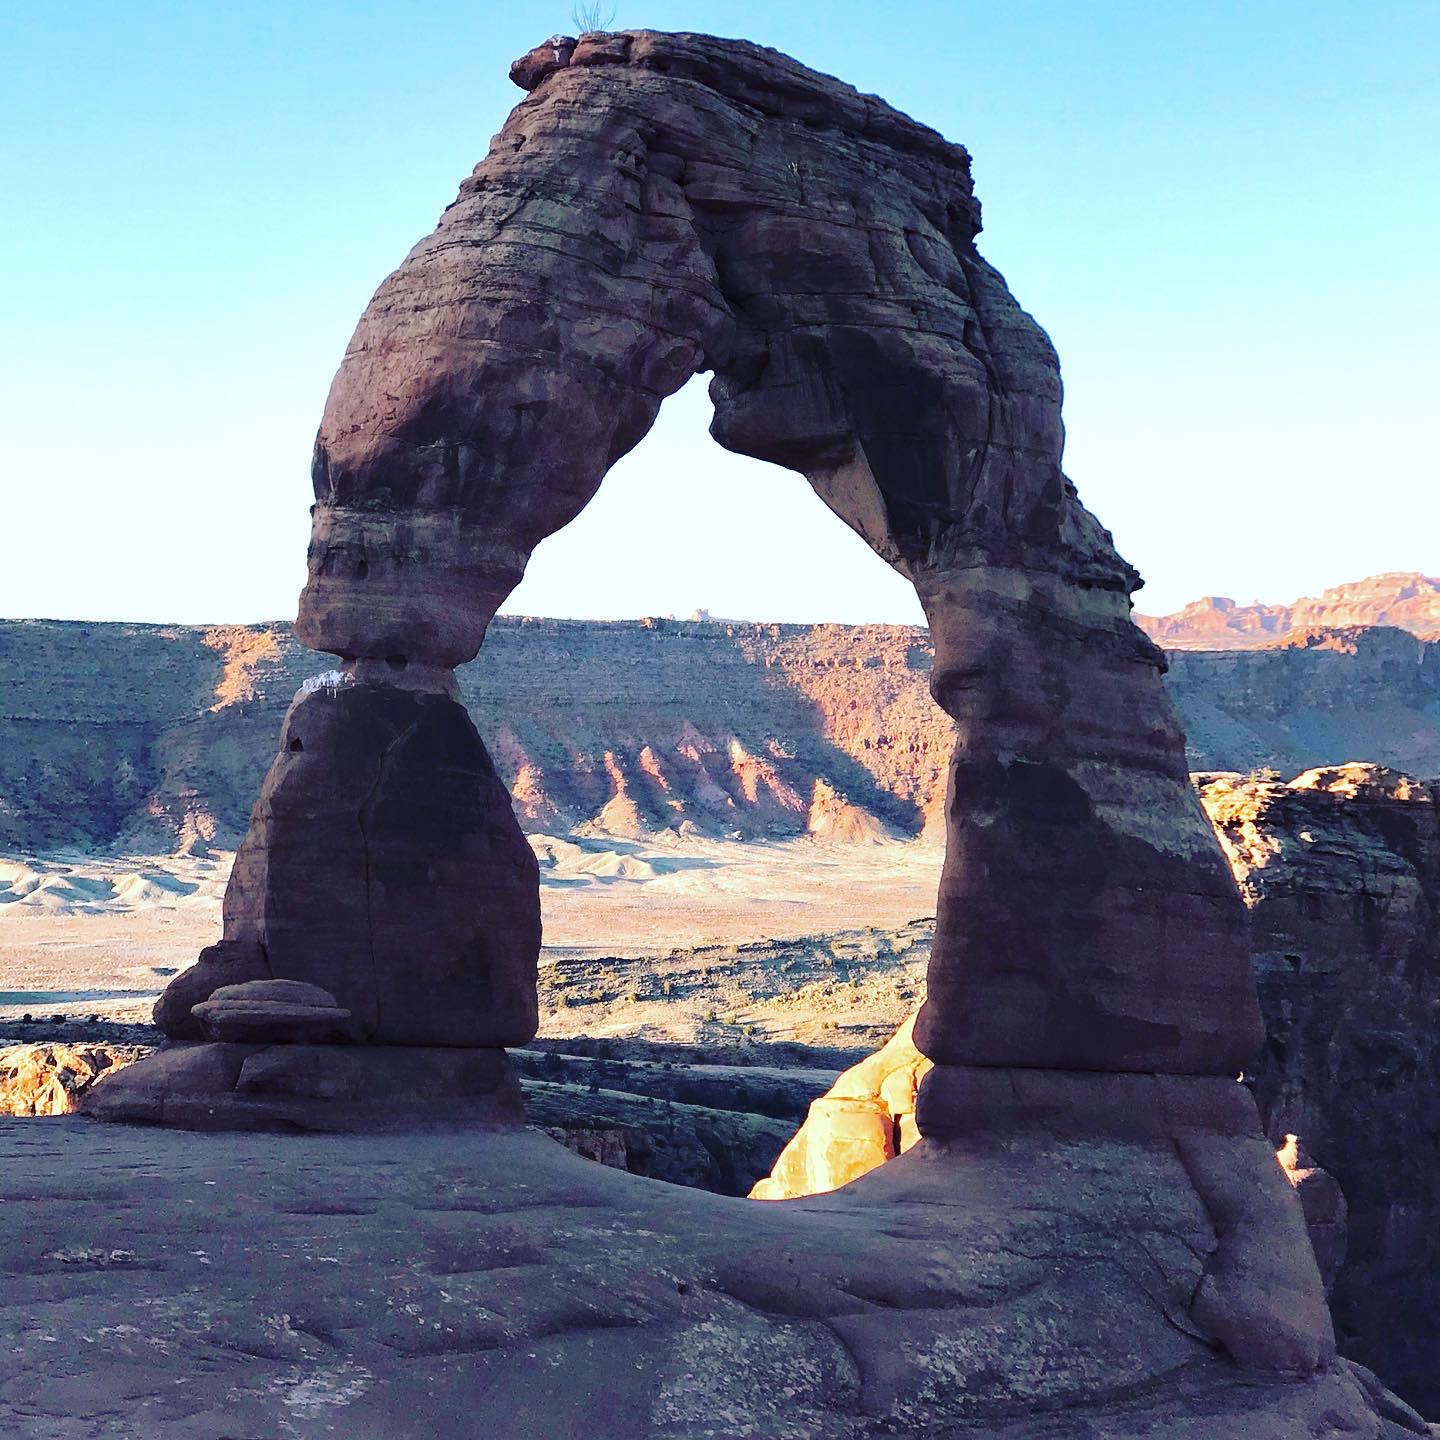 Arches National Park in Moab, Utah!